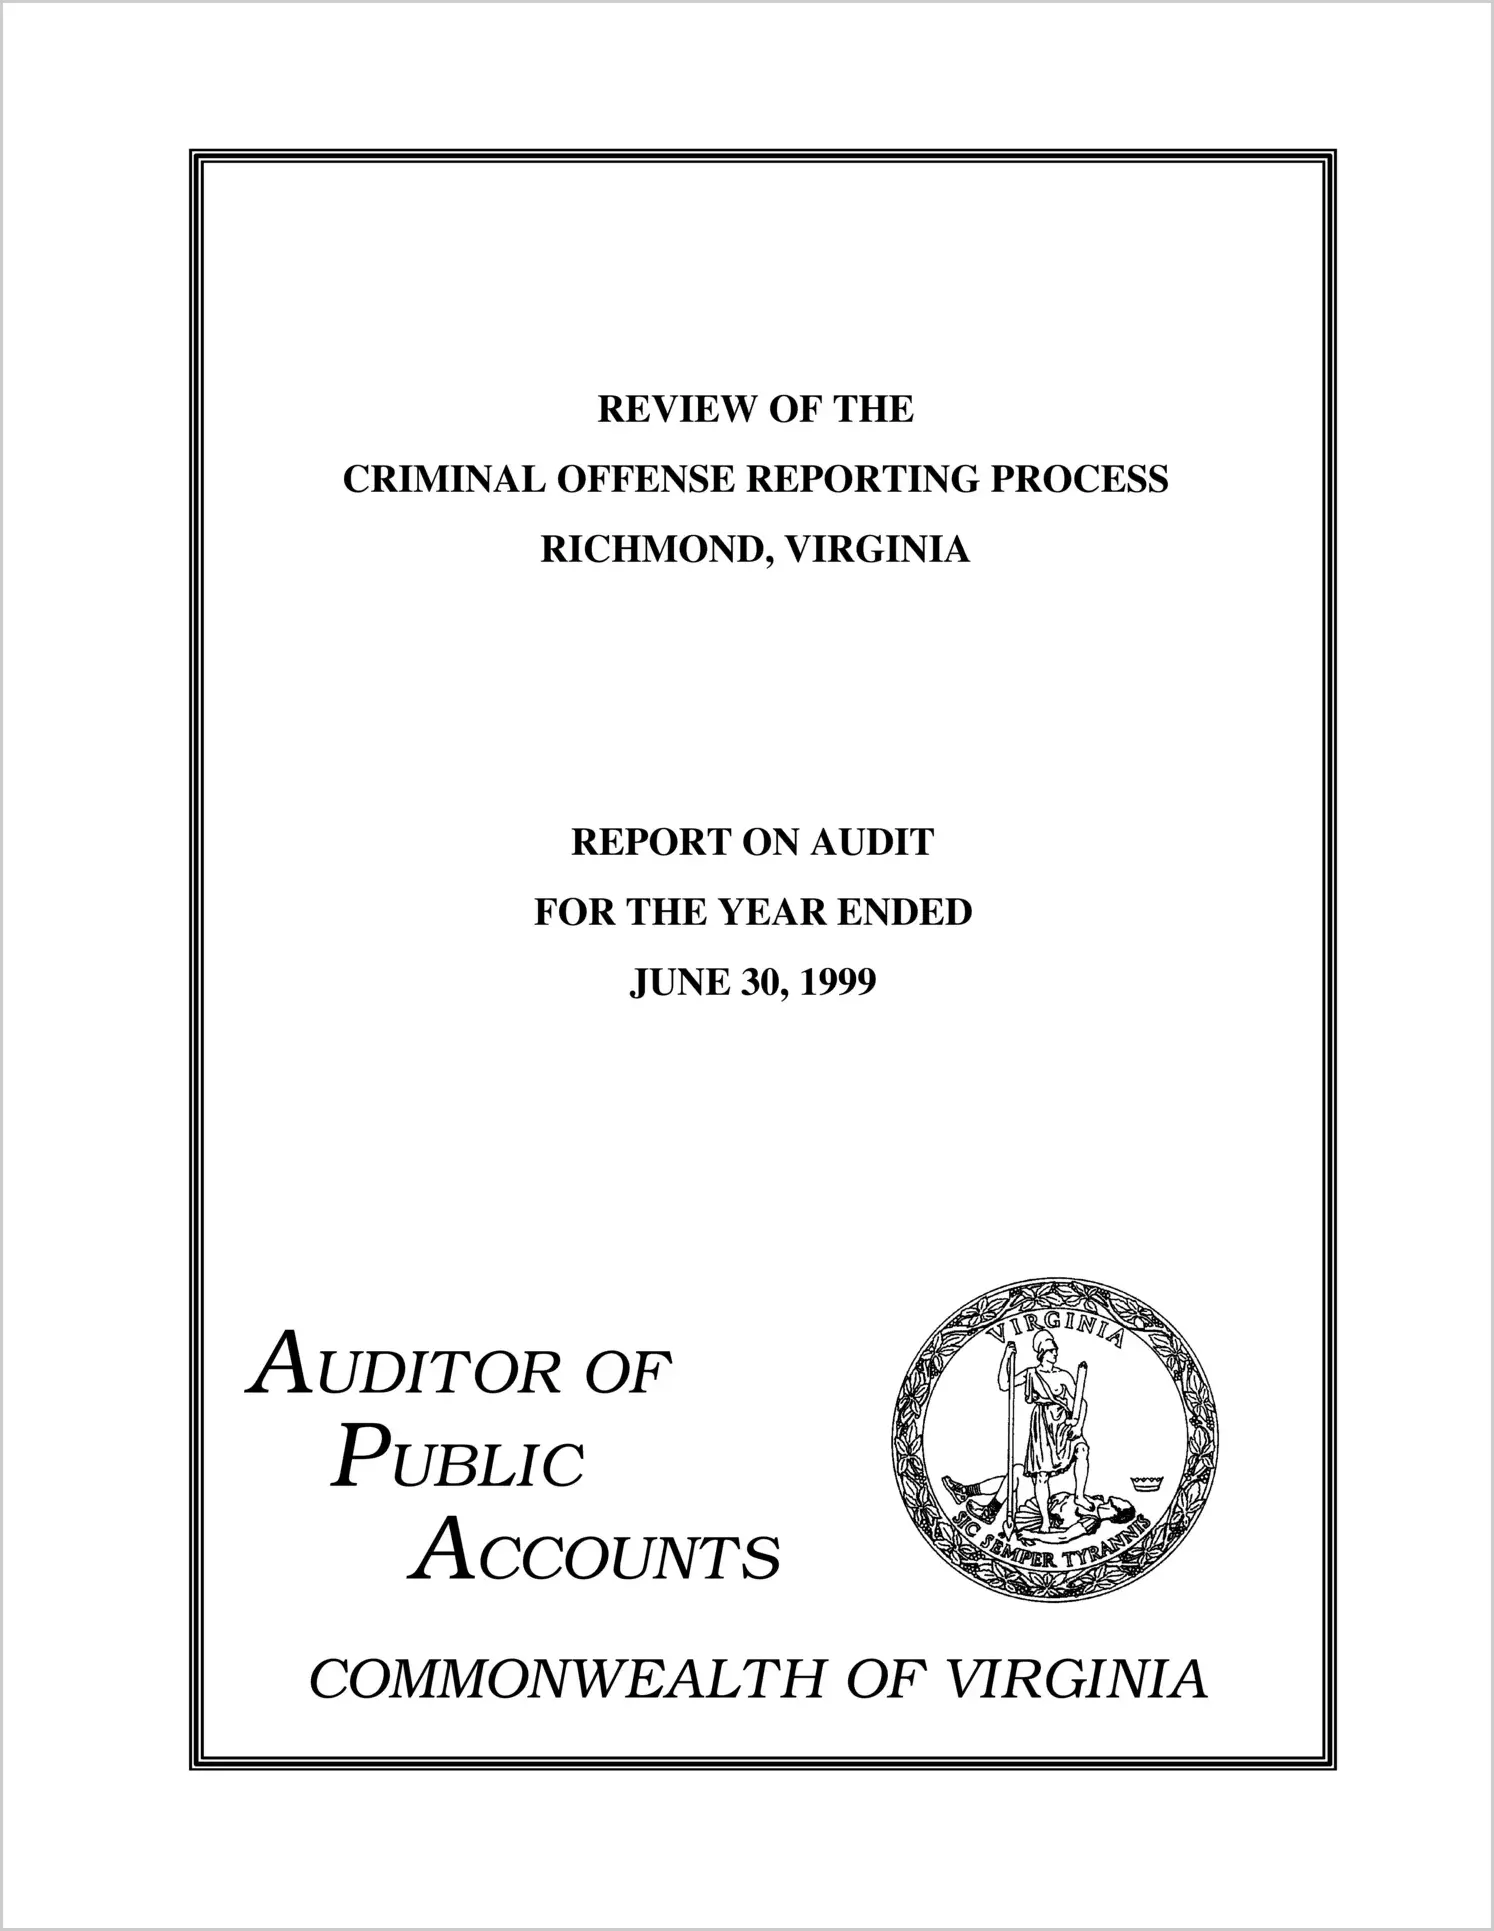 Special ReportReview of the Criminal Offense Reporting Process(Report Date: 11/29/1999)